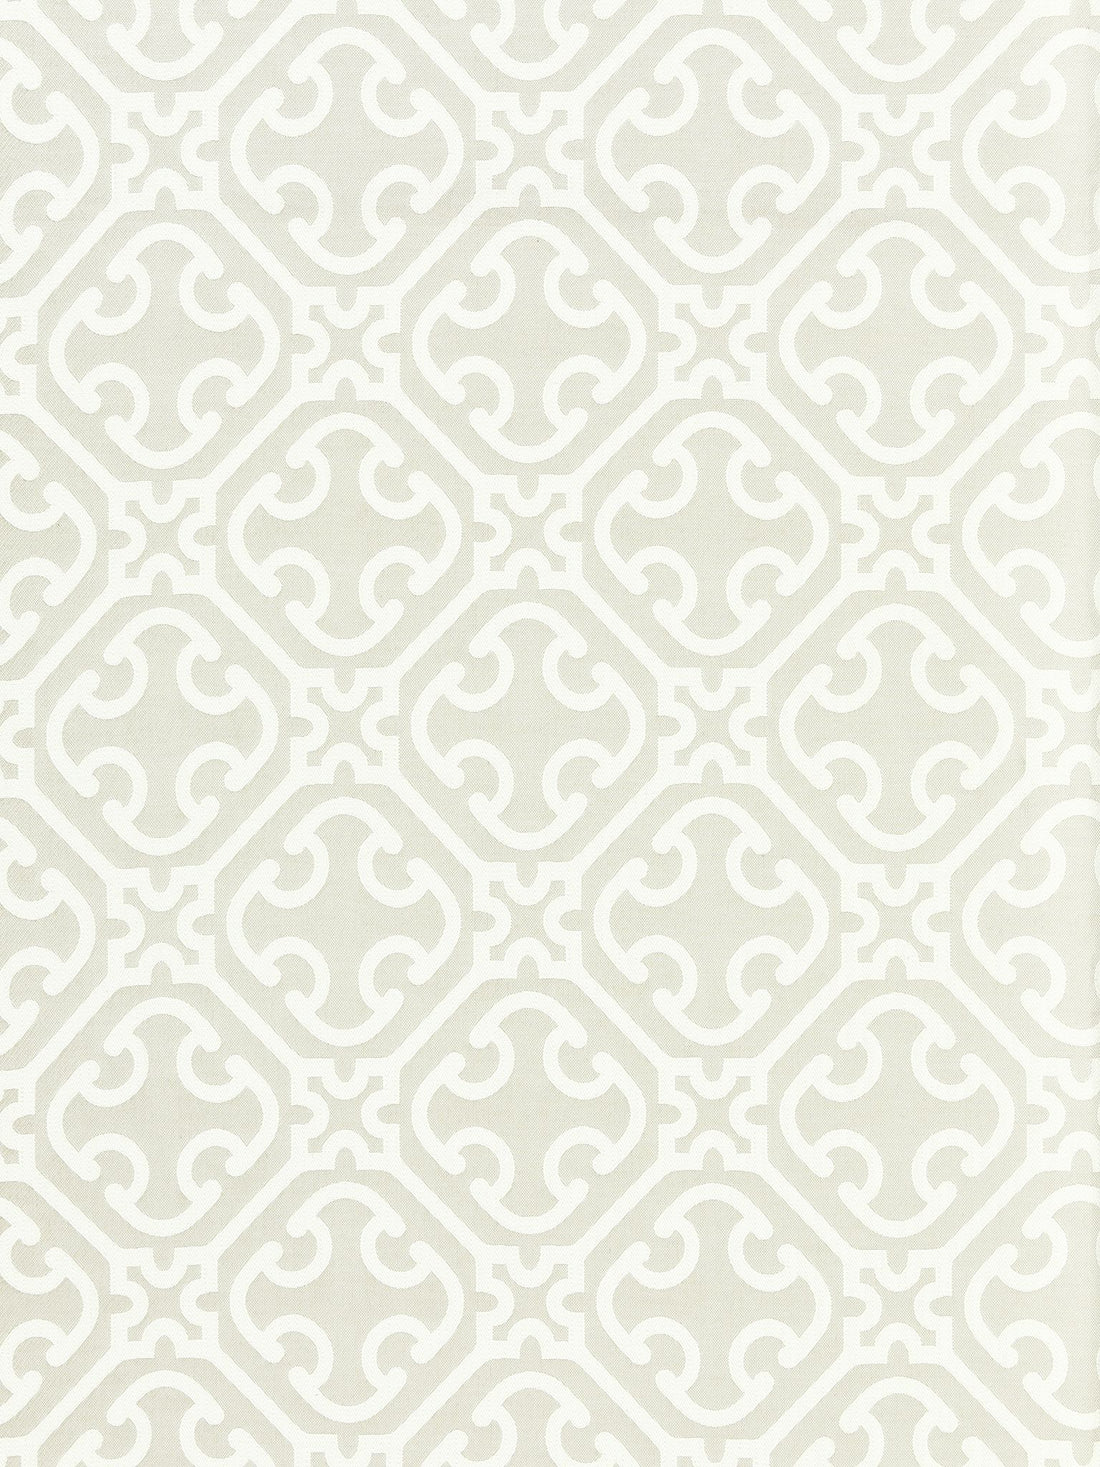 Ailin Lattice Weave fabric in linen color - pattern number SC 000127214 - by Scalamandre in the Scalamandre Fabrics Book 1 collection